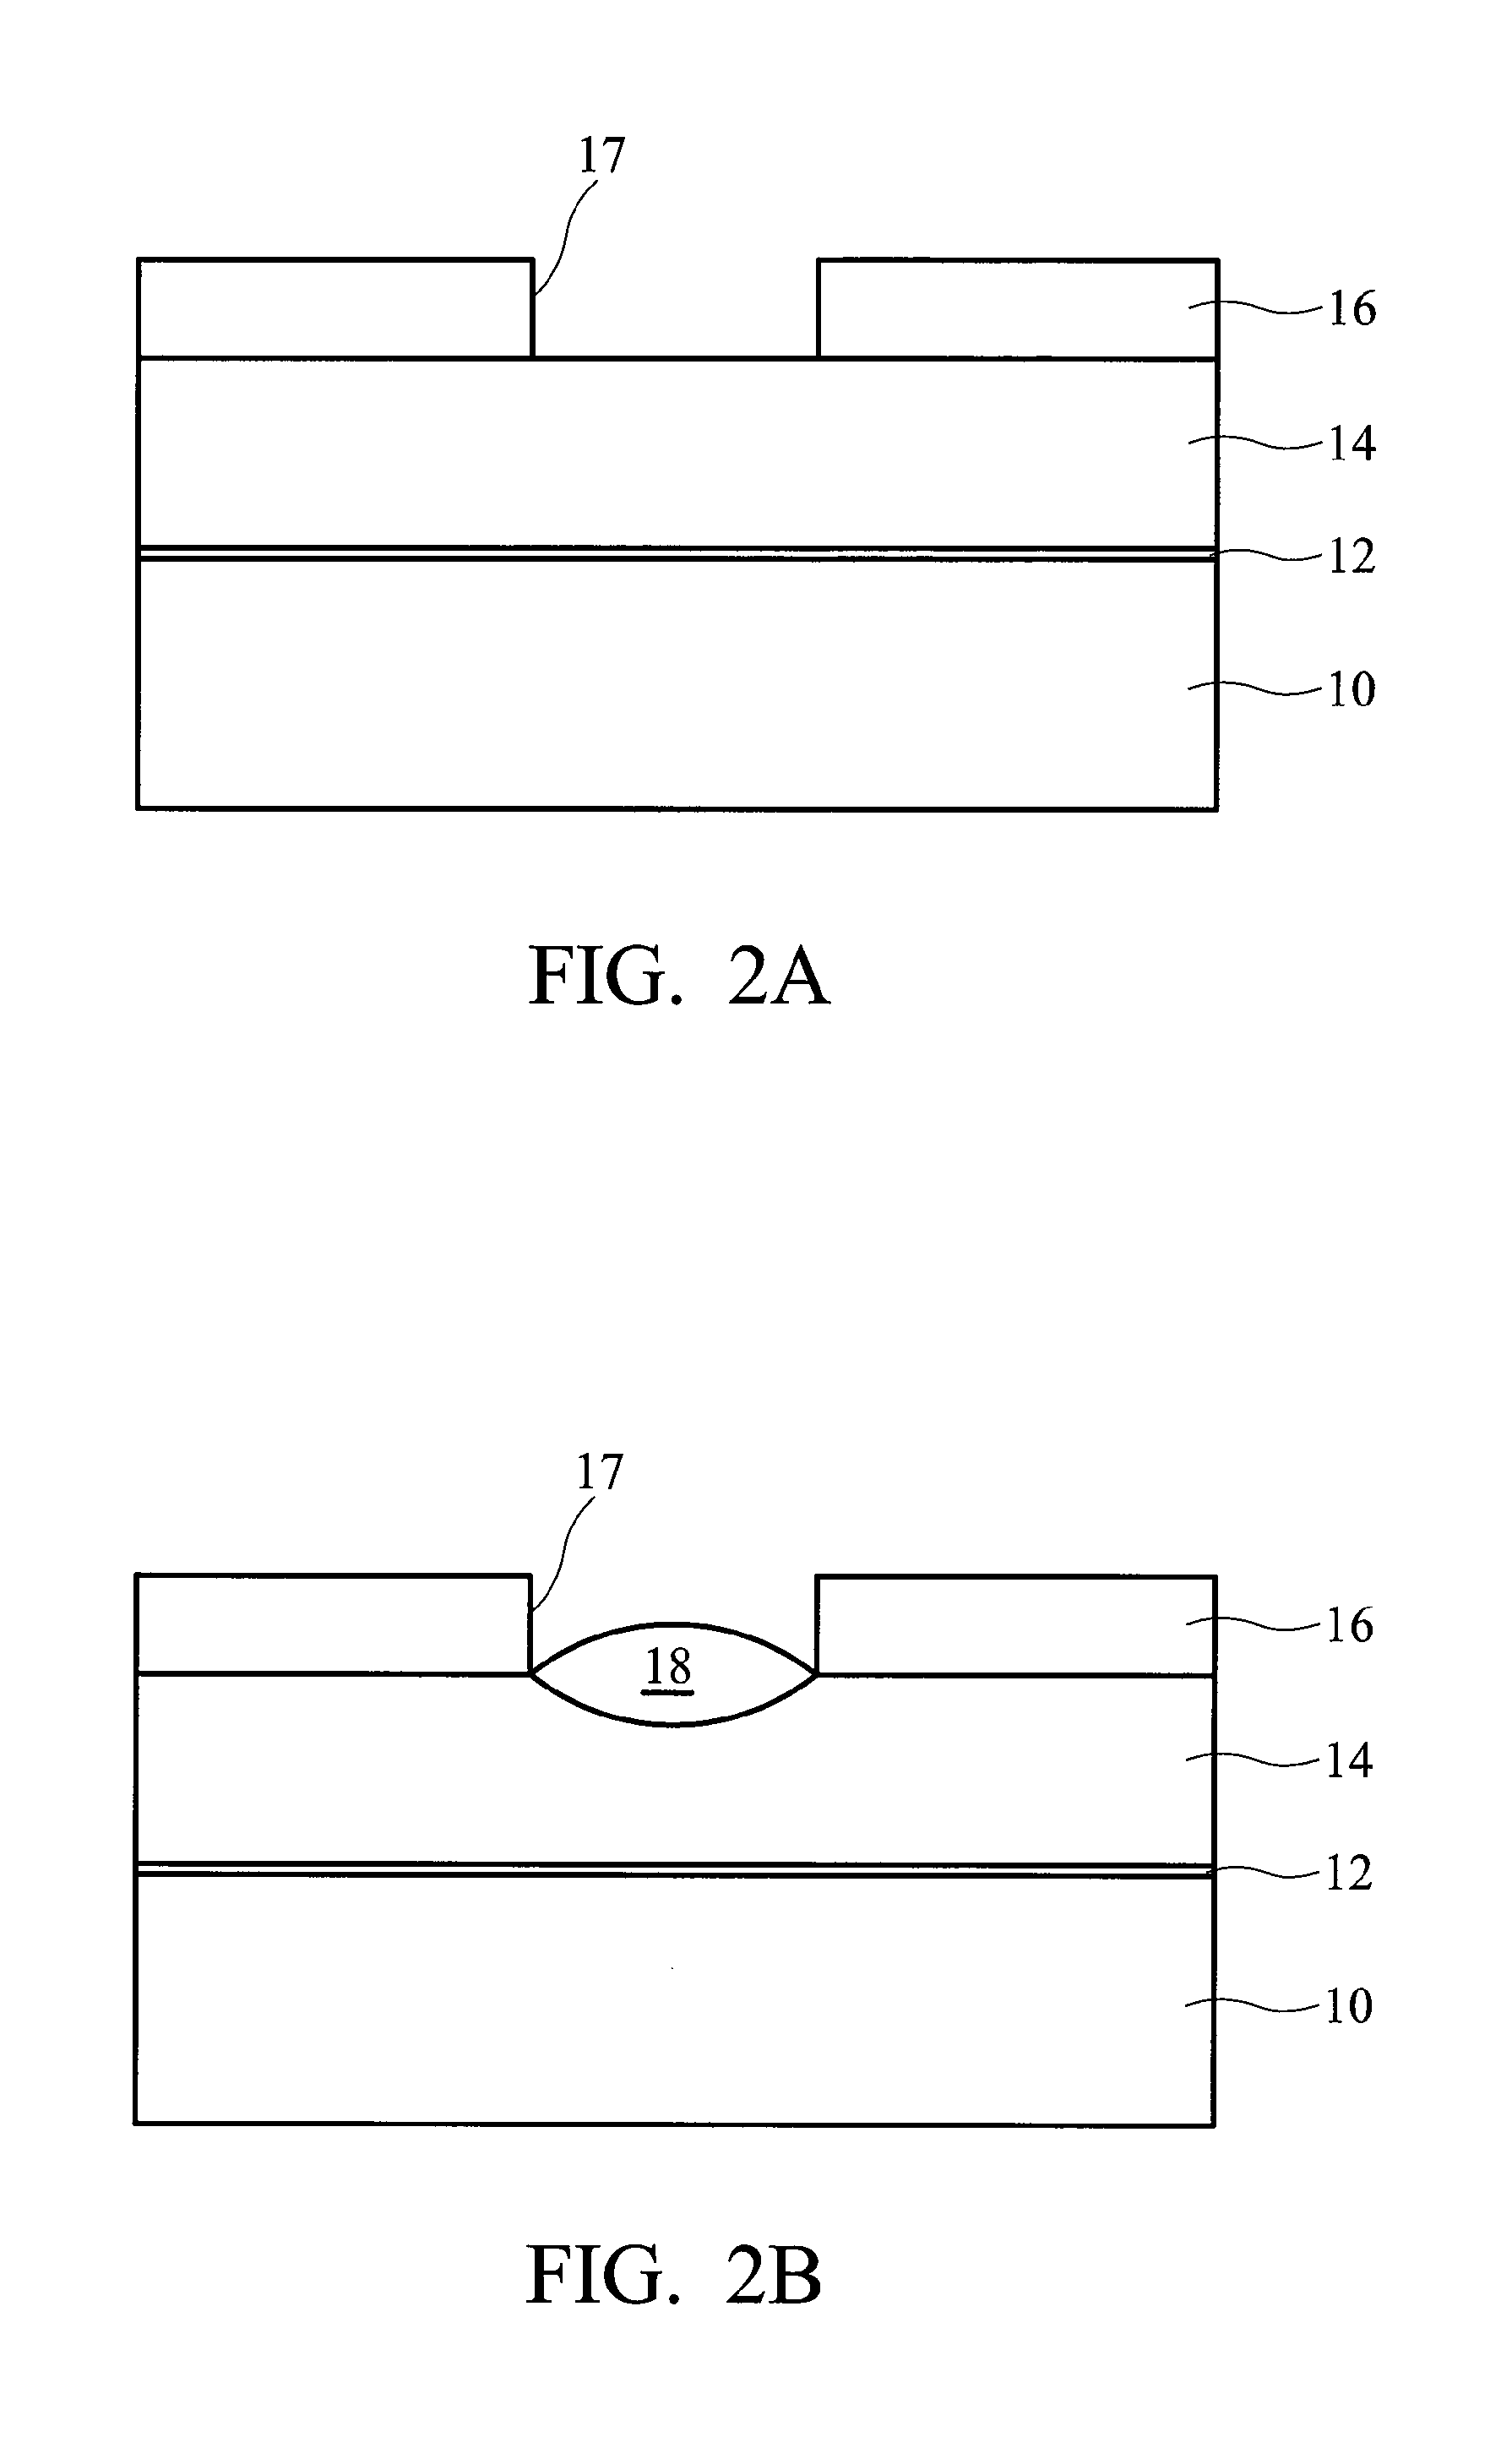 Floating gate with unique profile by means of undercutting for split-gate flash memory device